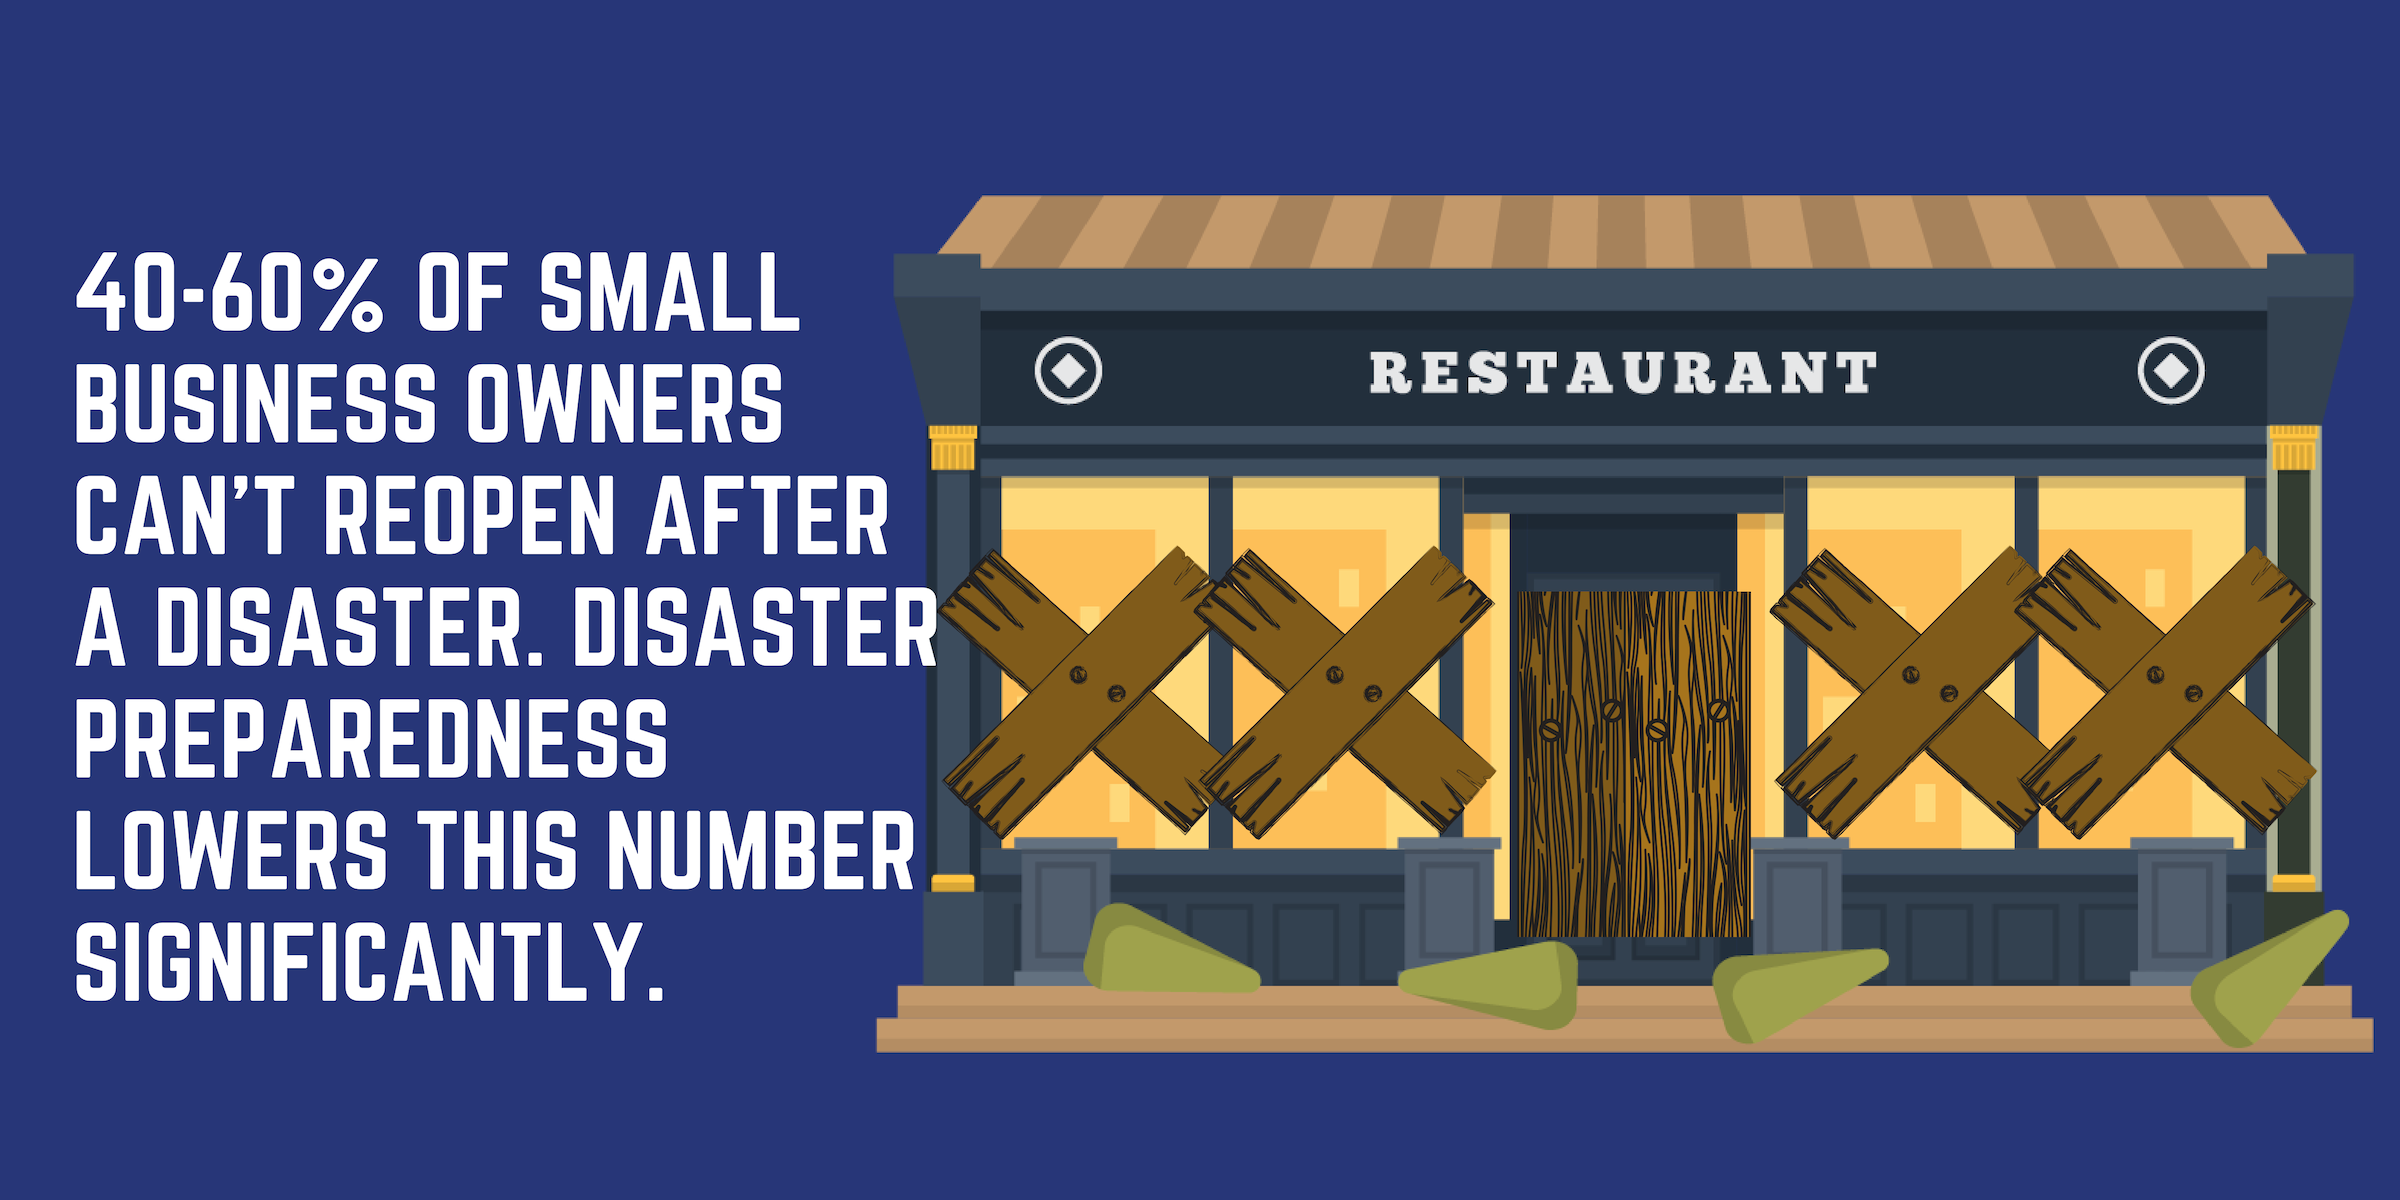 40-60% of small business owners can't reopen after a disaster. Disaster preparedness lowers this number significantly. 